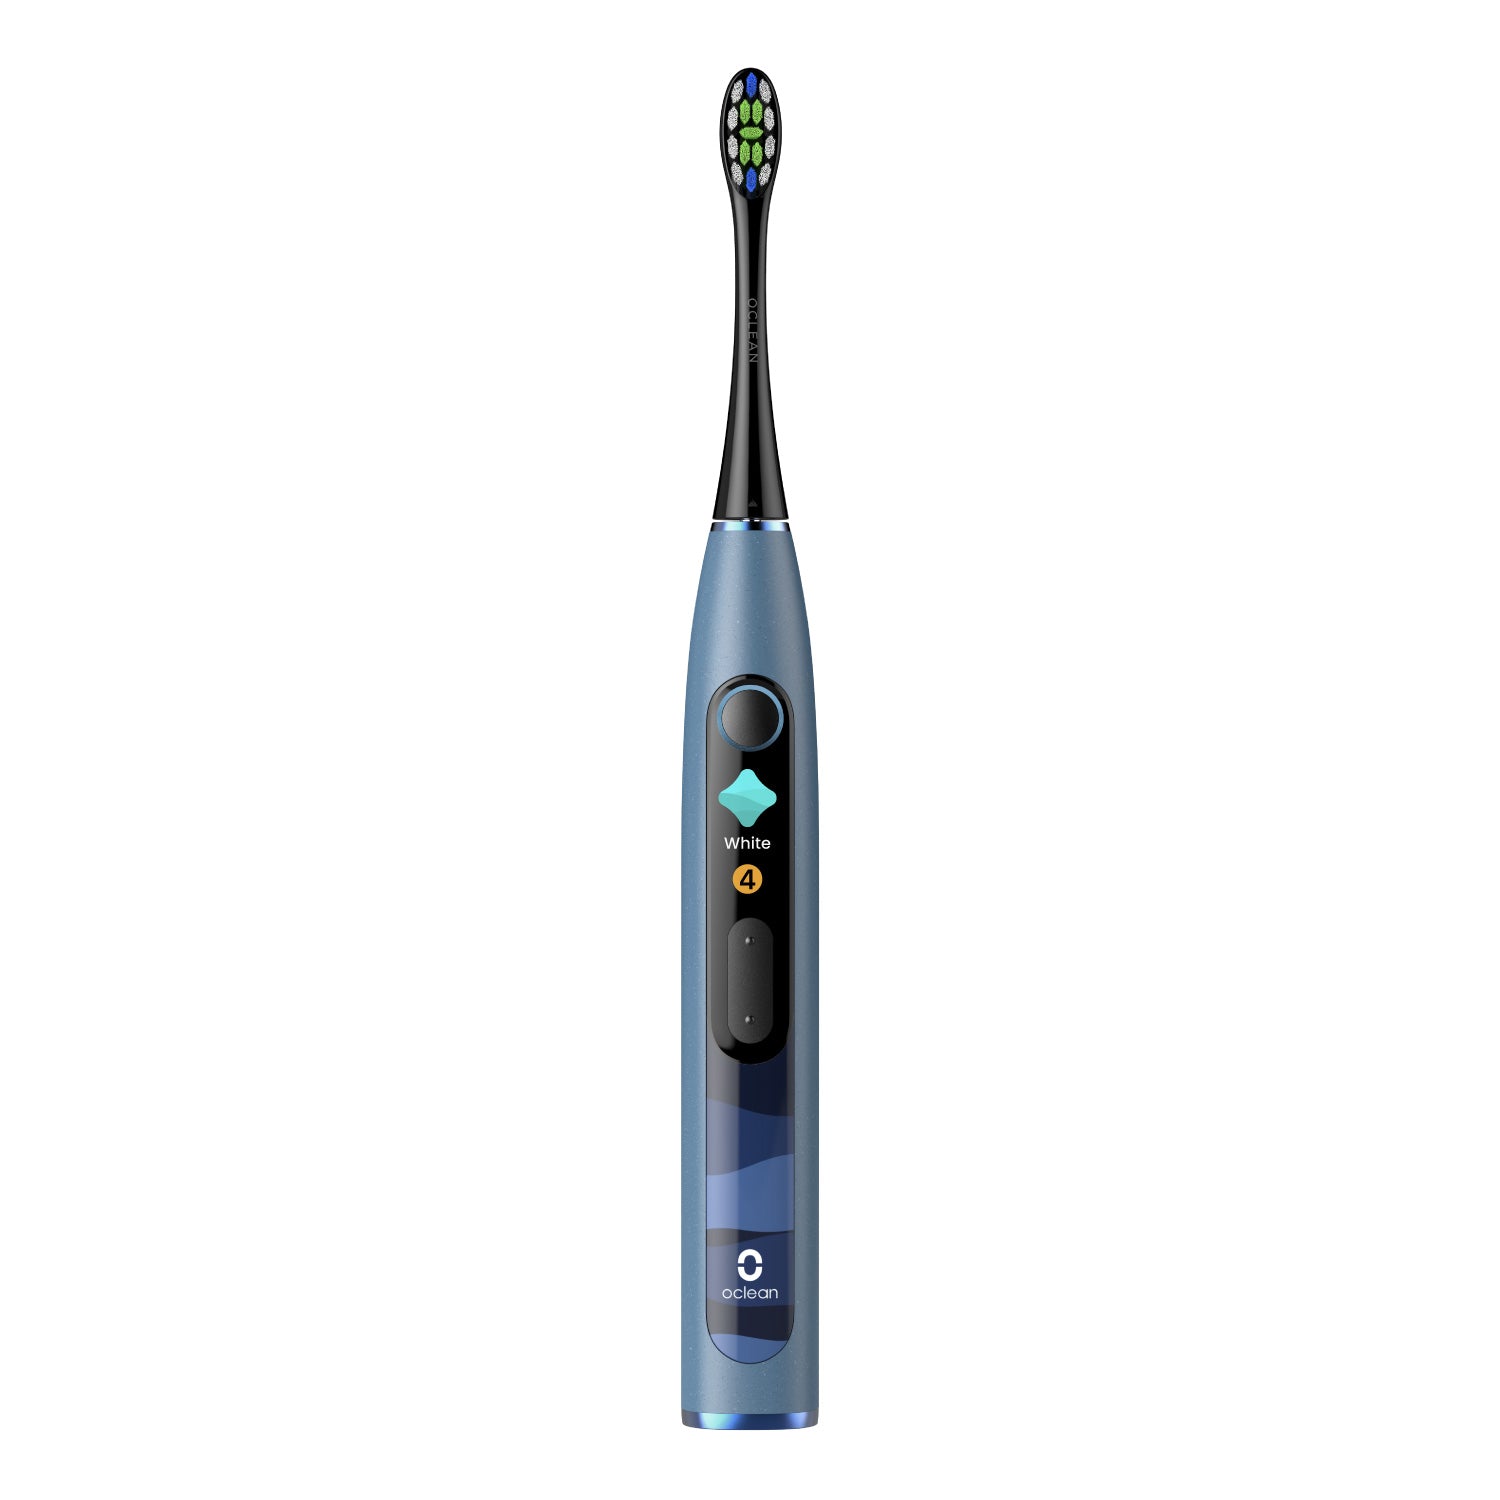 Oclean X10 Smart Sonic Electric Toothbrush Toothbrushes Blue  Oclean Official